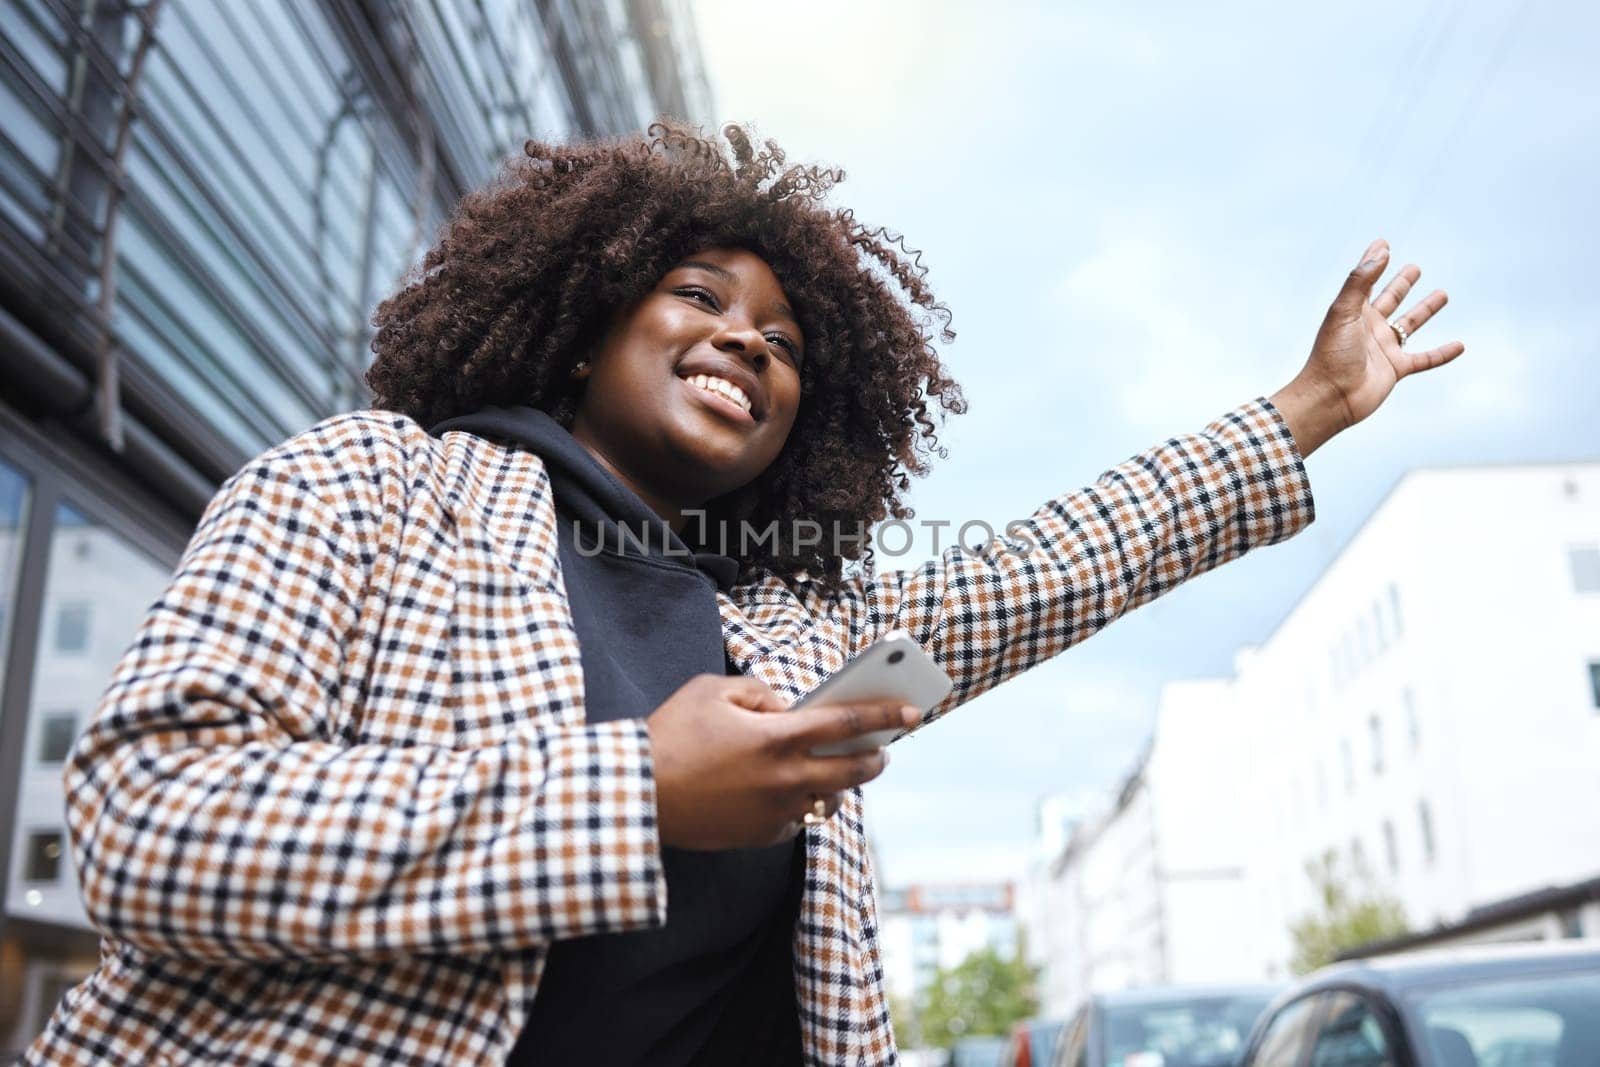 Taxi, sign and hands of black woman in city for travel, commute or waiting for transport on blue sky background. Hand, bus and stop by girl in Florida for transportation service, app or drive request.